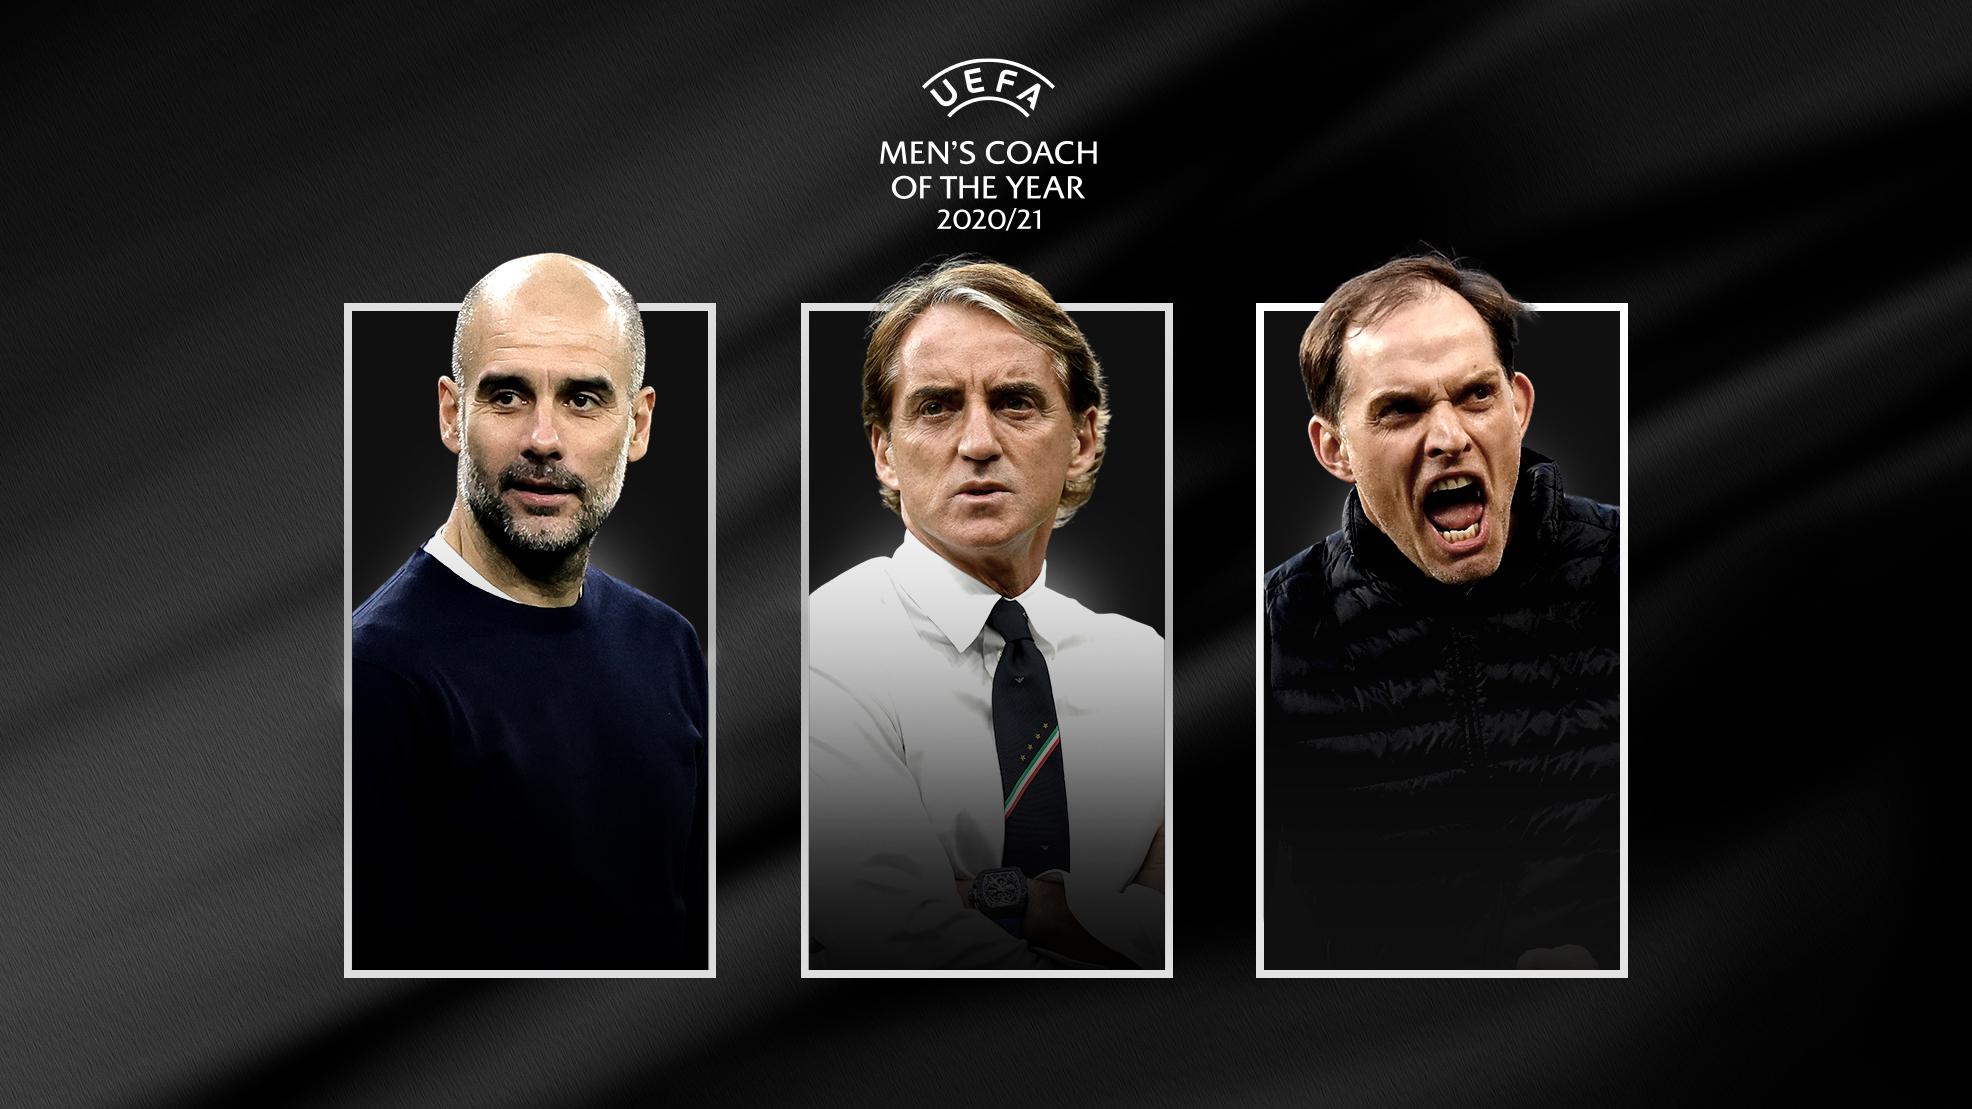 UEFA Men's coach of the year